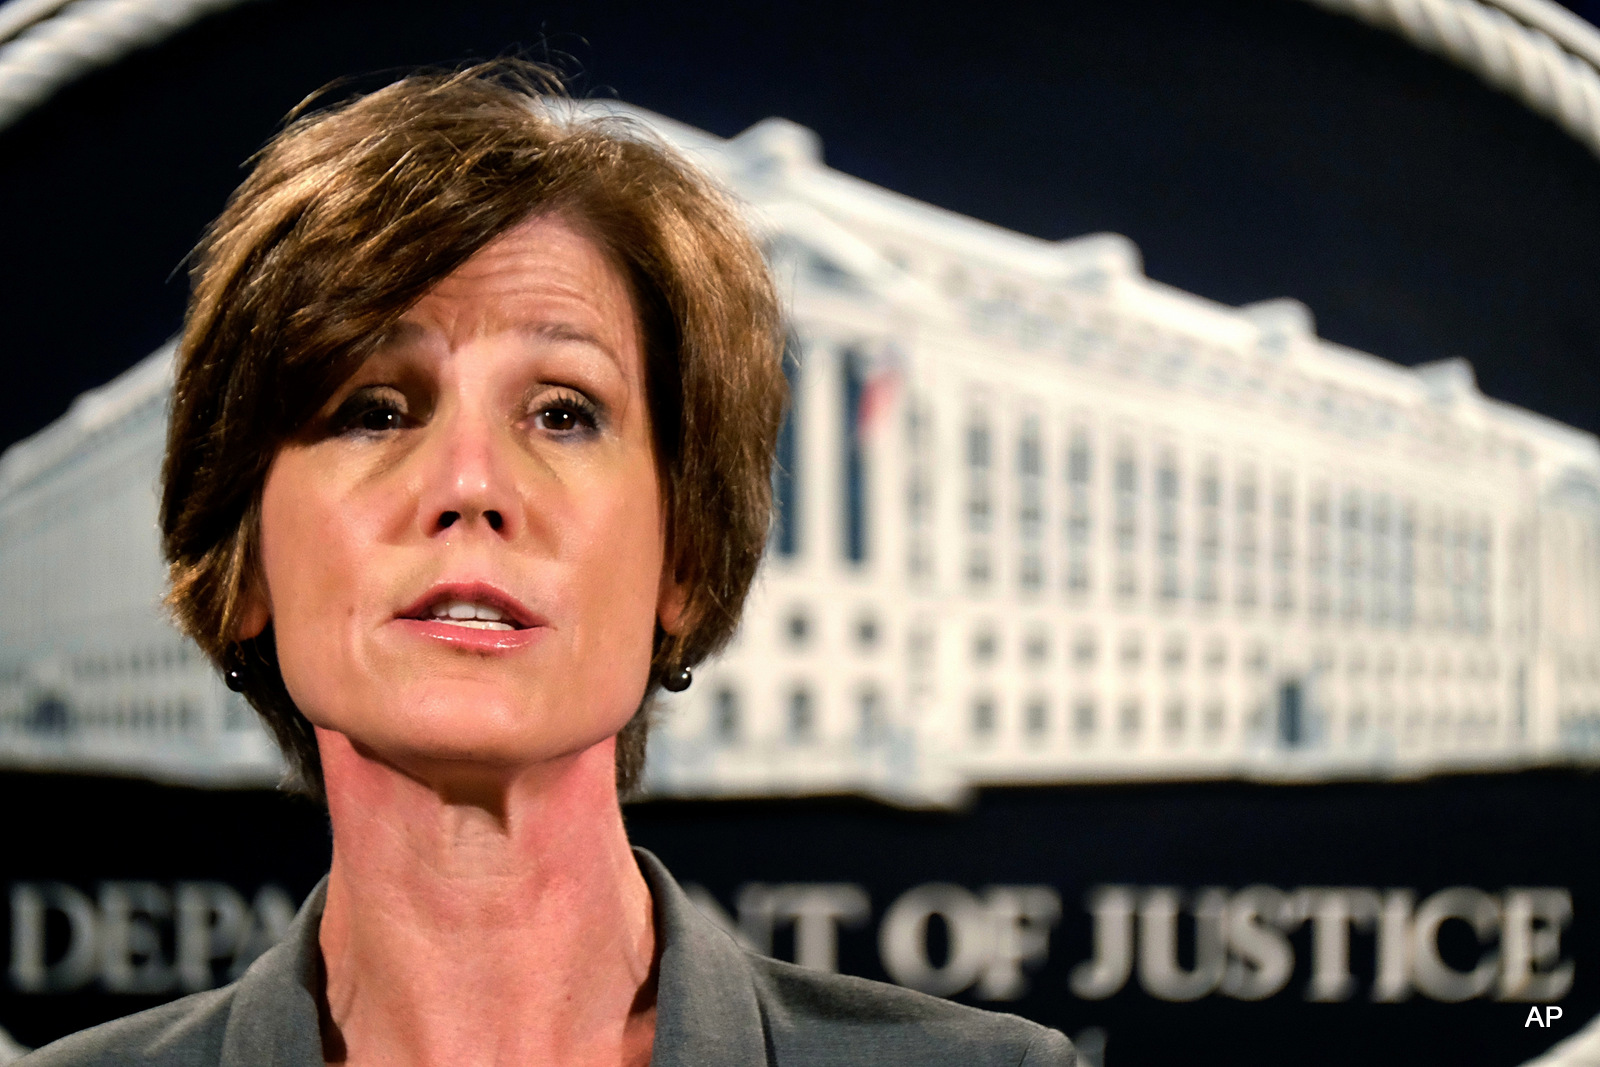 Deputy Attorney General Sally Yates speaks during a news conference at the Justice Department in Washington. The Justice Department says it’s phasing out its relationships with private prisons after a recent audit found the private facilities have more safety and security problems than ones run by the government. 